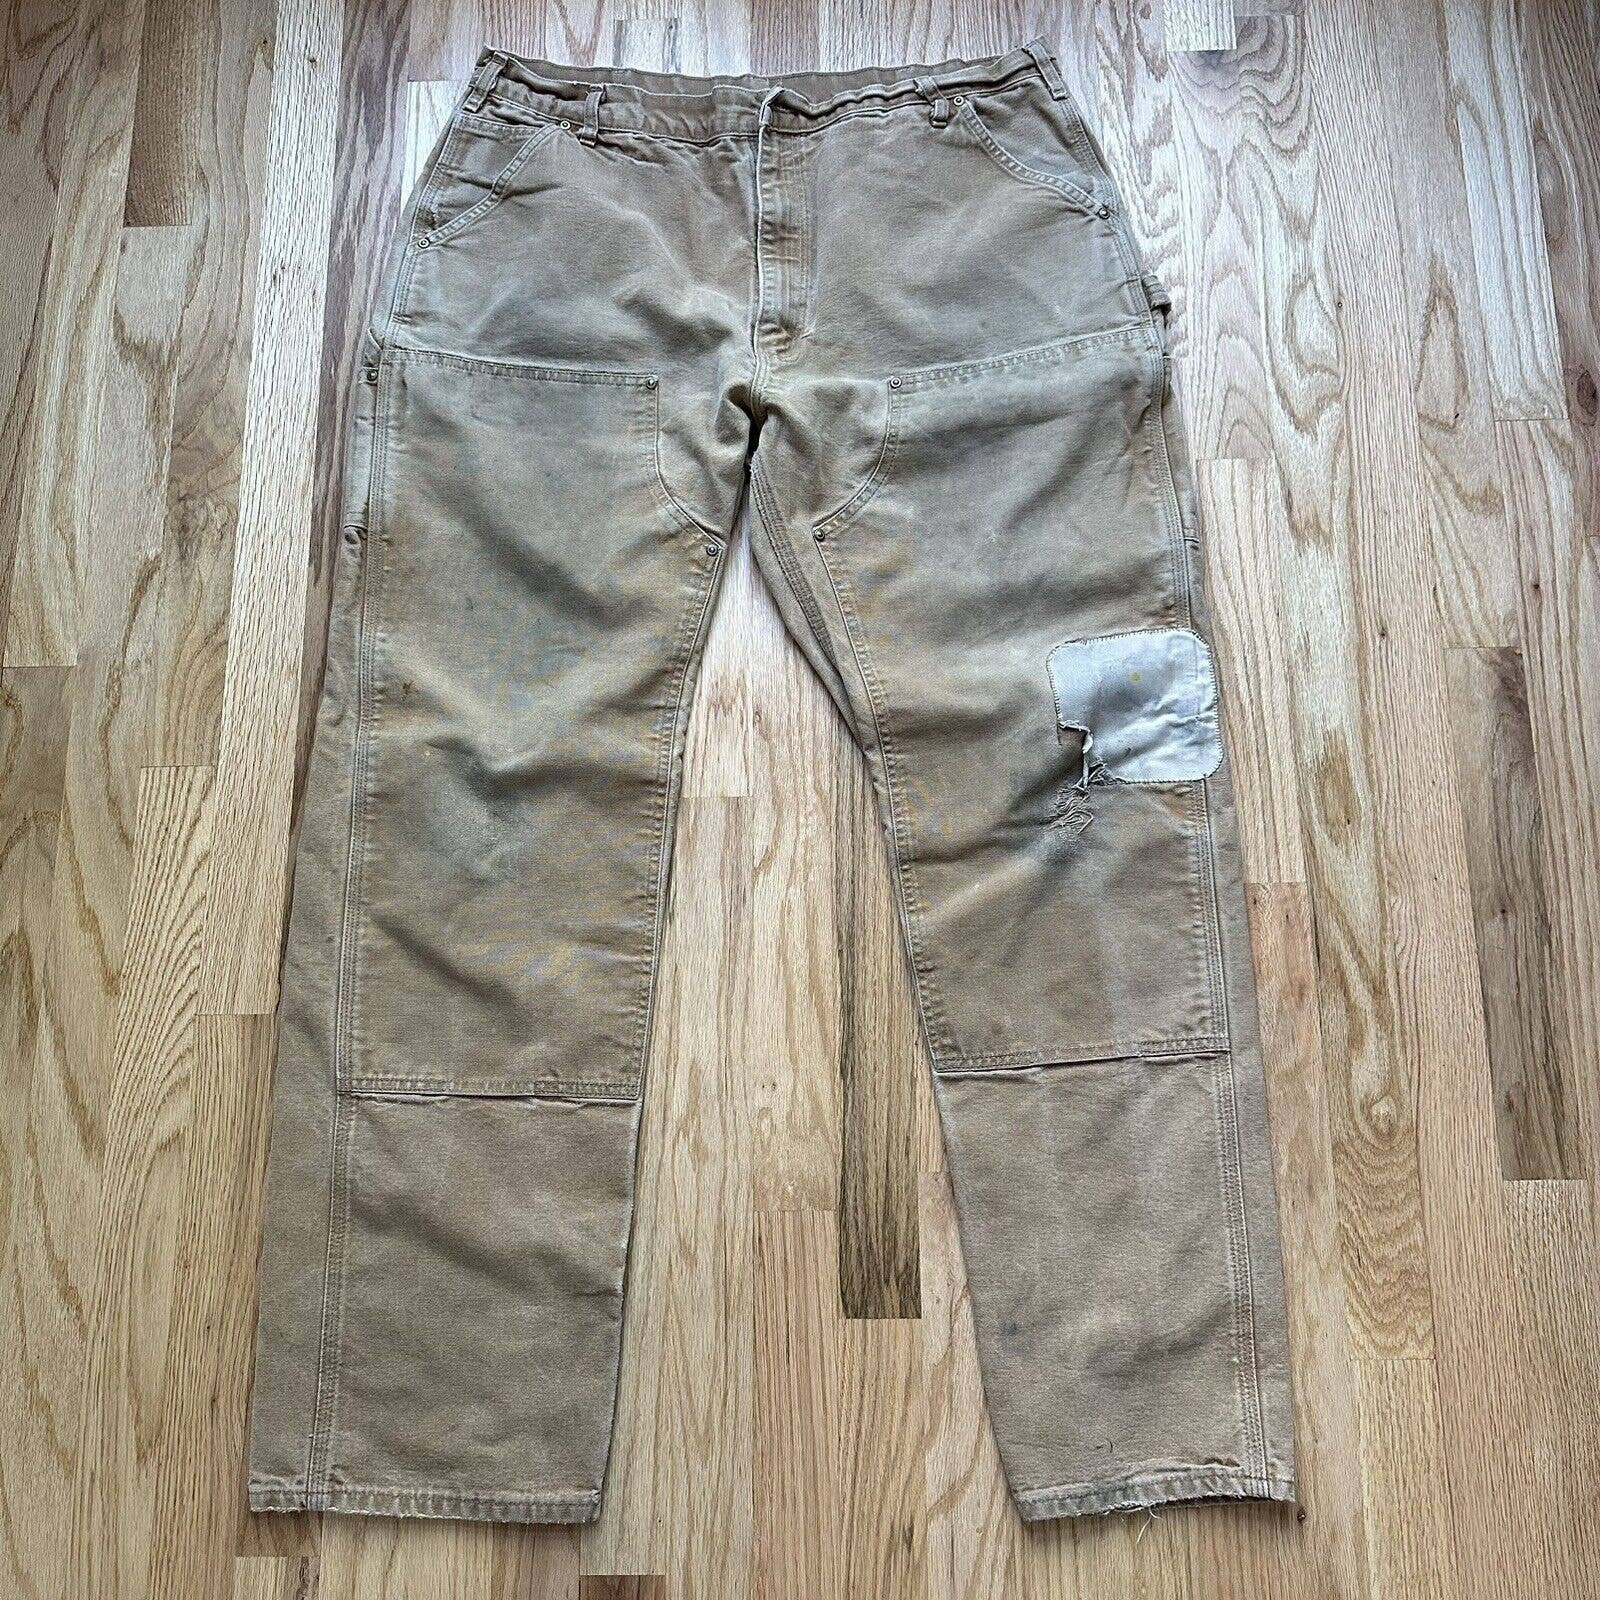 Y2K Carhartt Double Knee Patched Work Pants in Tobacco, Size 35x30